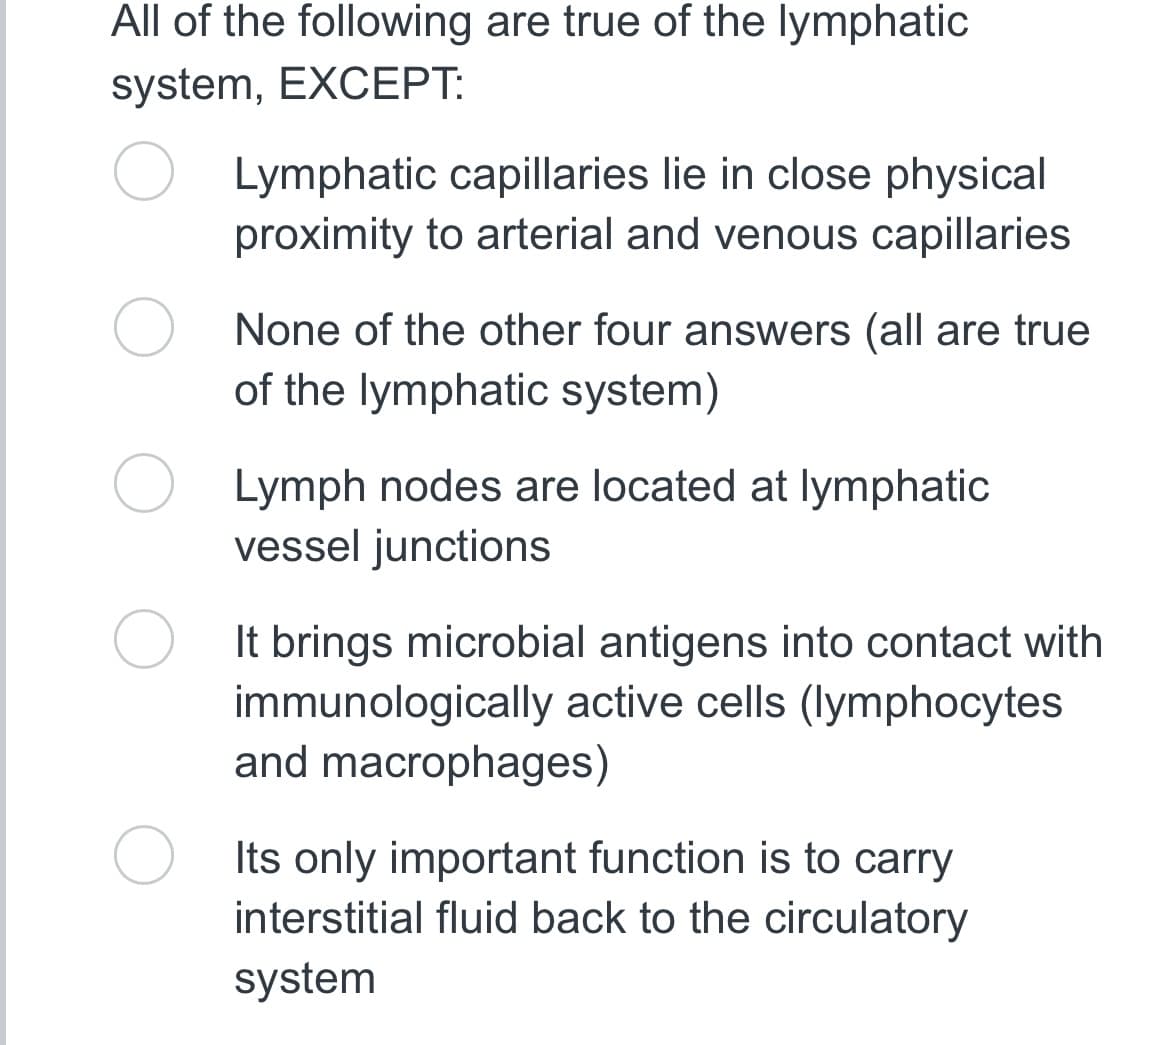 All of the following are true of the lymphatic
system, EXCEPT:
Lymphatic capillaries lie in close physical
proximity to arterial and venous capillaries
None of the other four answers (all are true
of the lymphatic system)
Lymph nodes are located at lymphatic
vessel junctions
It brings microbial antigens into contact with
immunologically active cells (lymphocytes
and macrophages)
Its only important function is to carry
interstitial fluid back to the circulatory
system